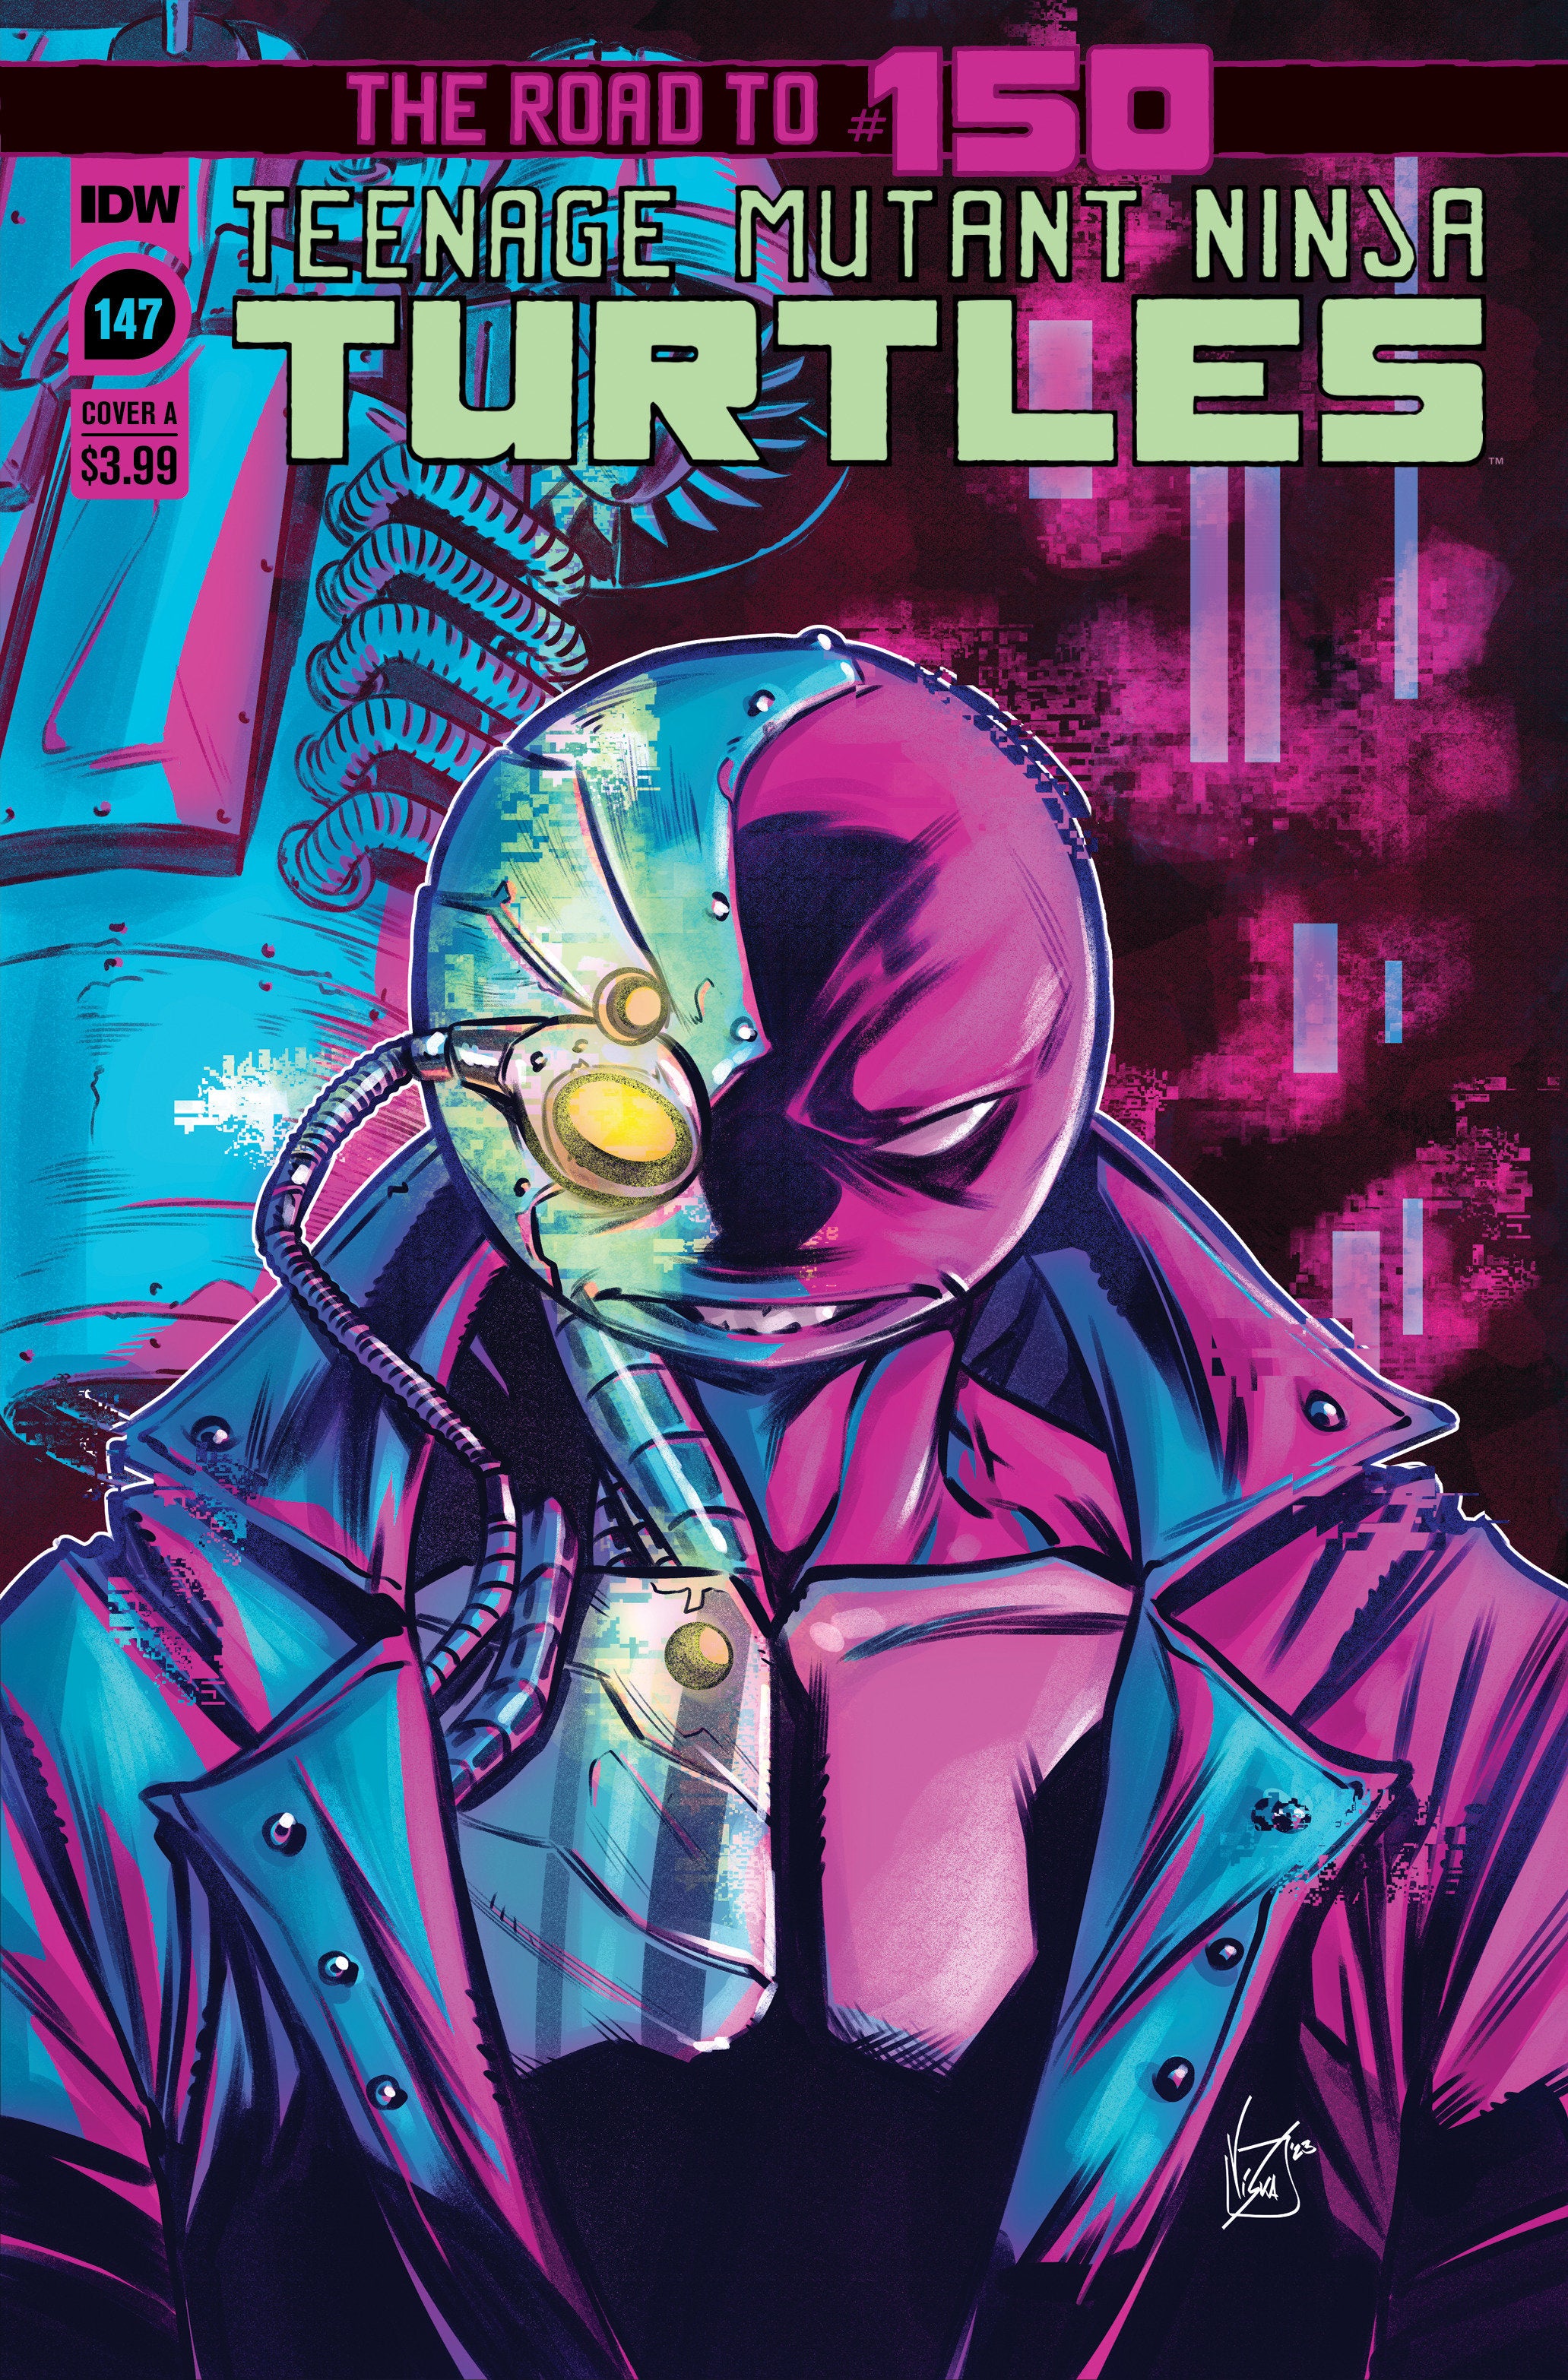 Teenage Mutant Ninja Turtles #148 Cover A (Federici) | Game Master's Emporium (The New GME)